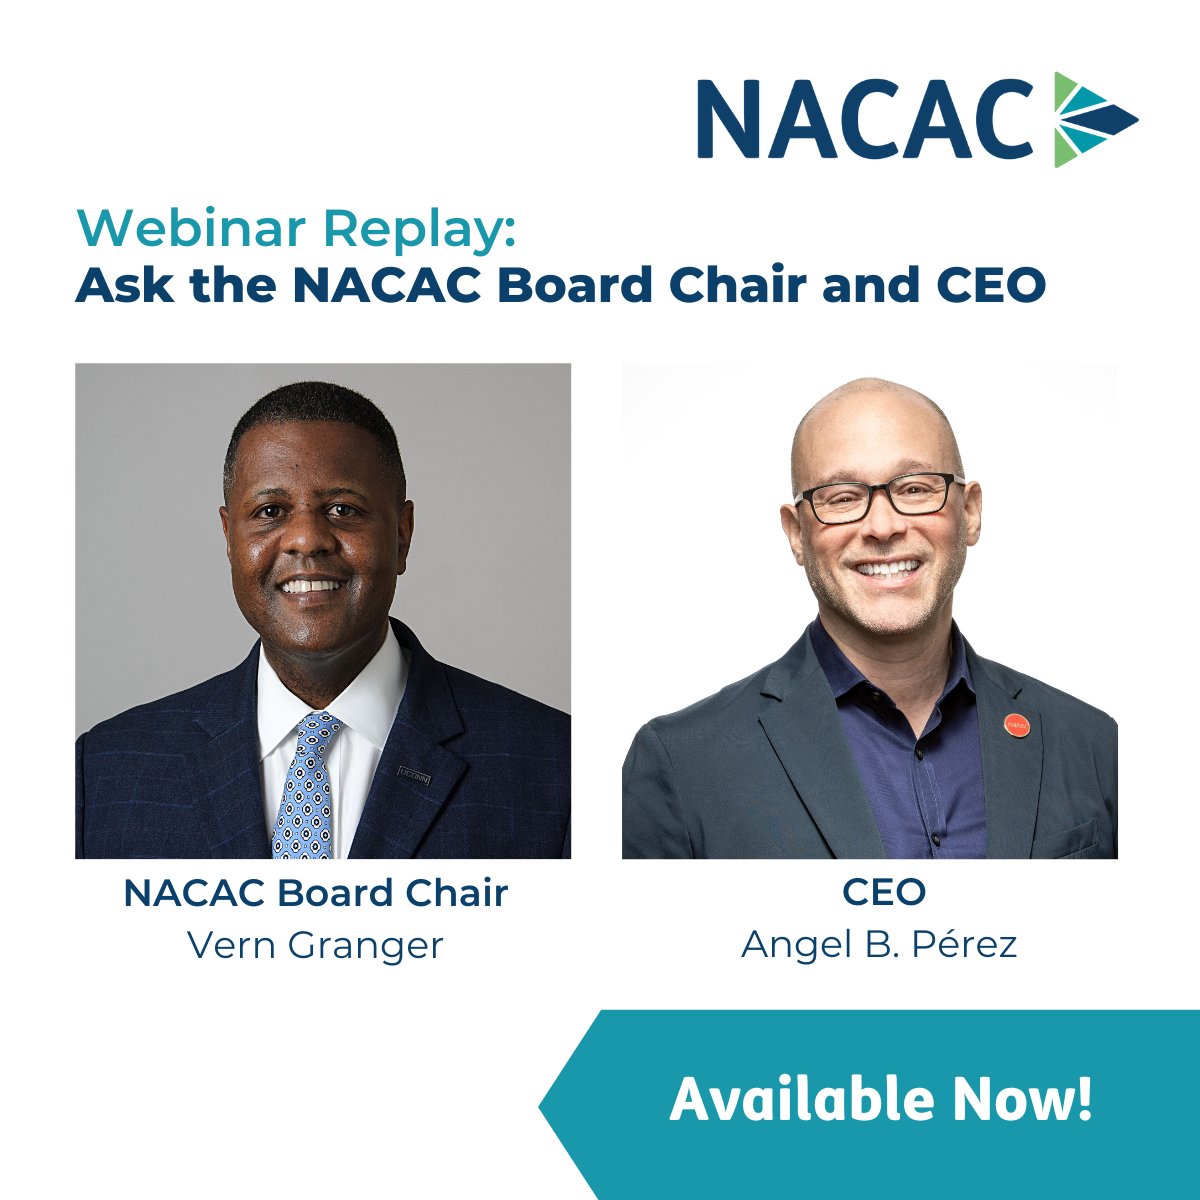 Webinar Replay: On Oct 19, #NACAC Board Chair Vern Granger and CEO @AngelBPerez continued the conversation from the State of the Association meeting held at the annual conference in Houston and took questions from members. ow.ly/31K750LnYtF